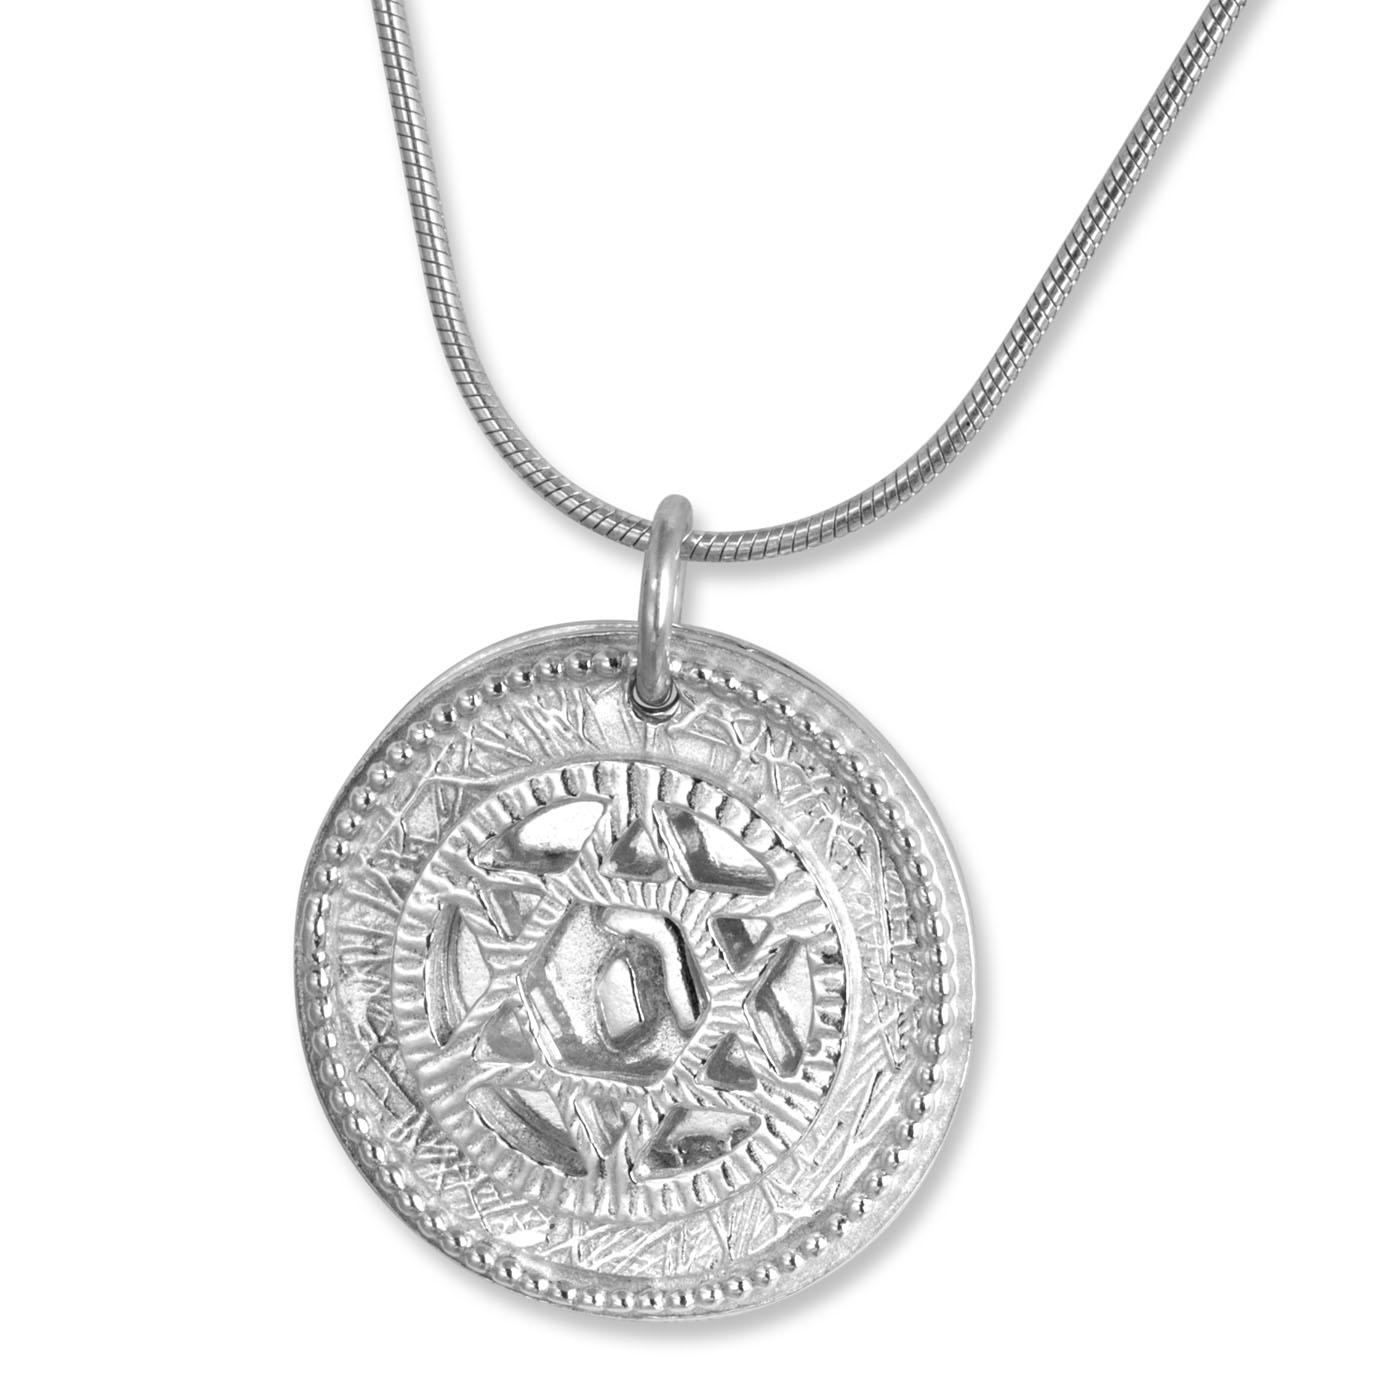 Sterling Silver Yemenite-Style Double-Disk Pendant with Star of David - 1